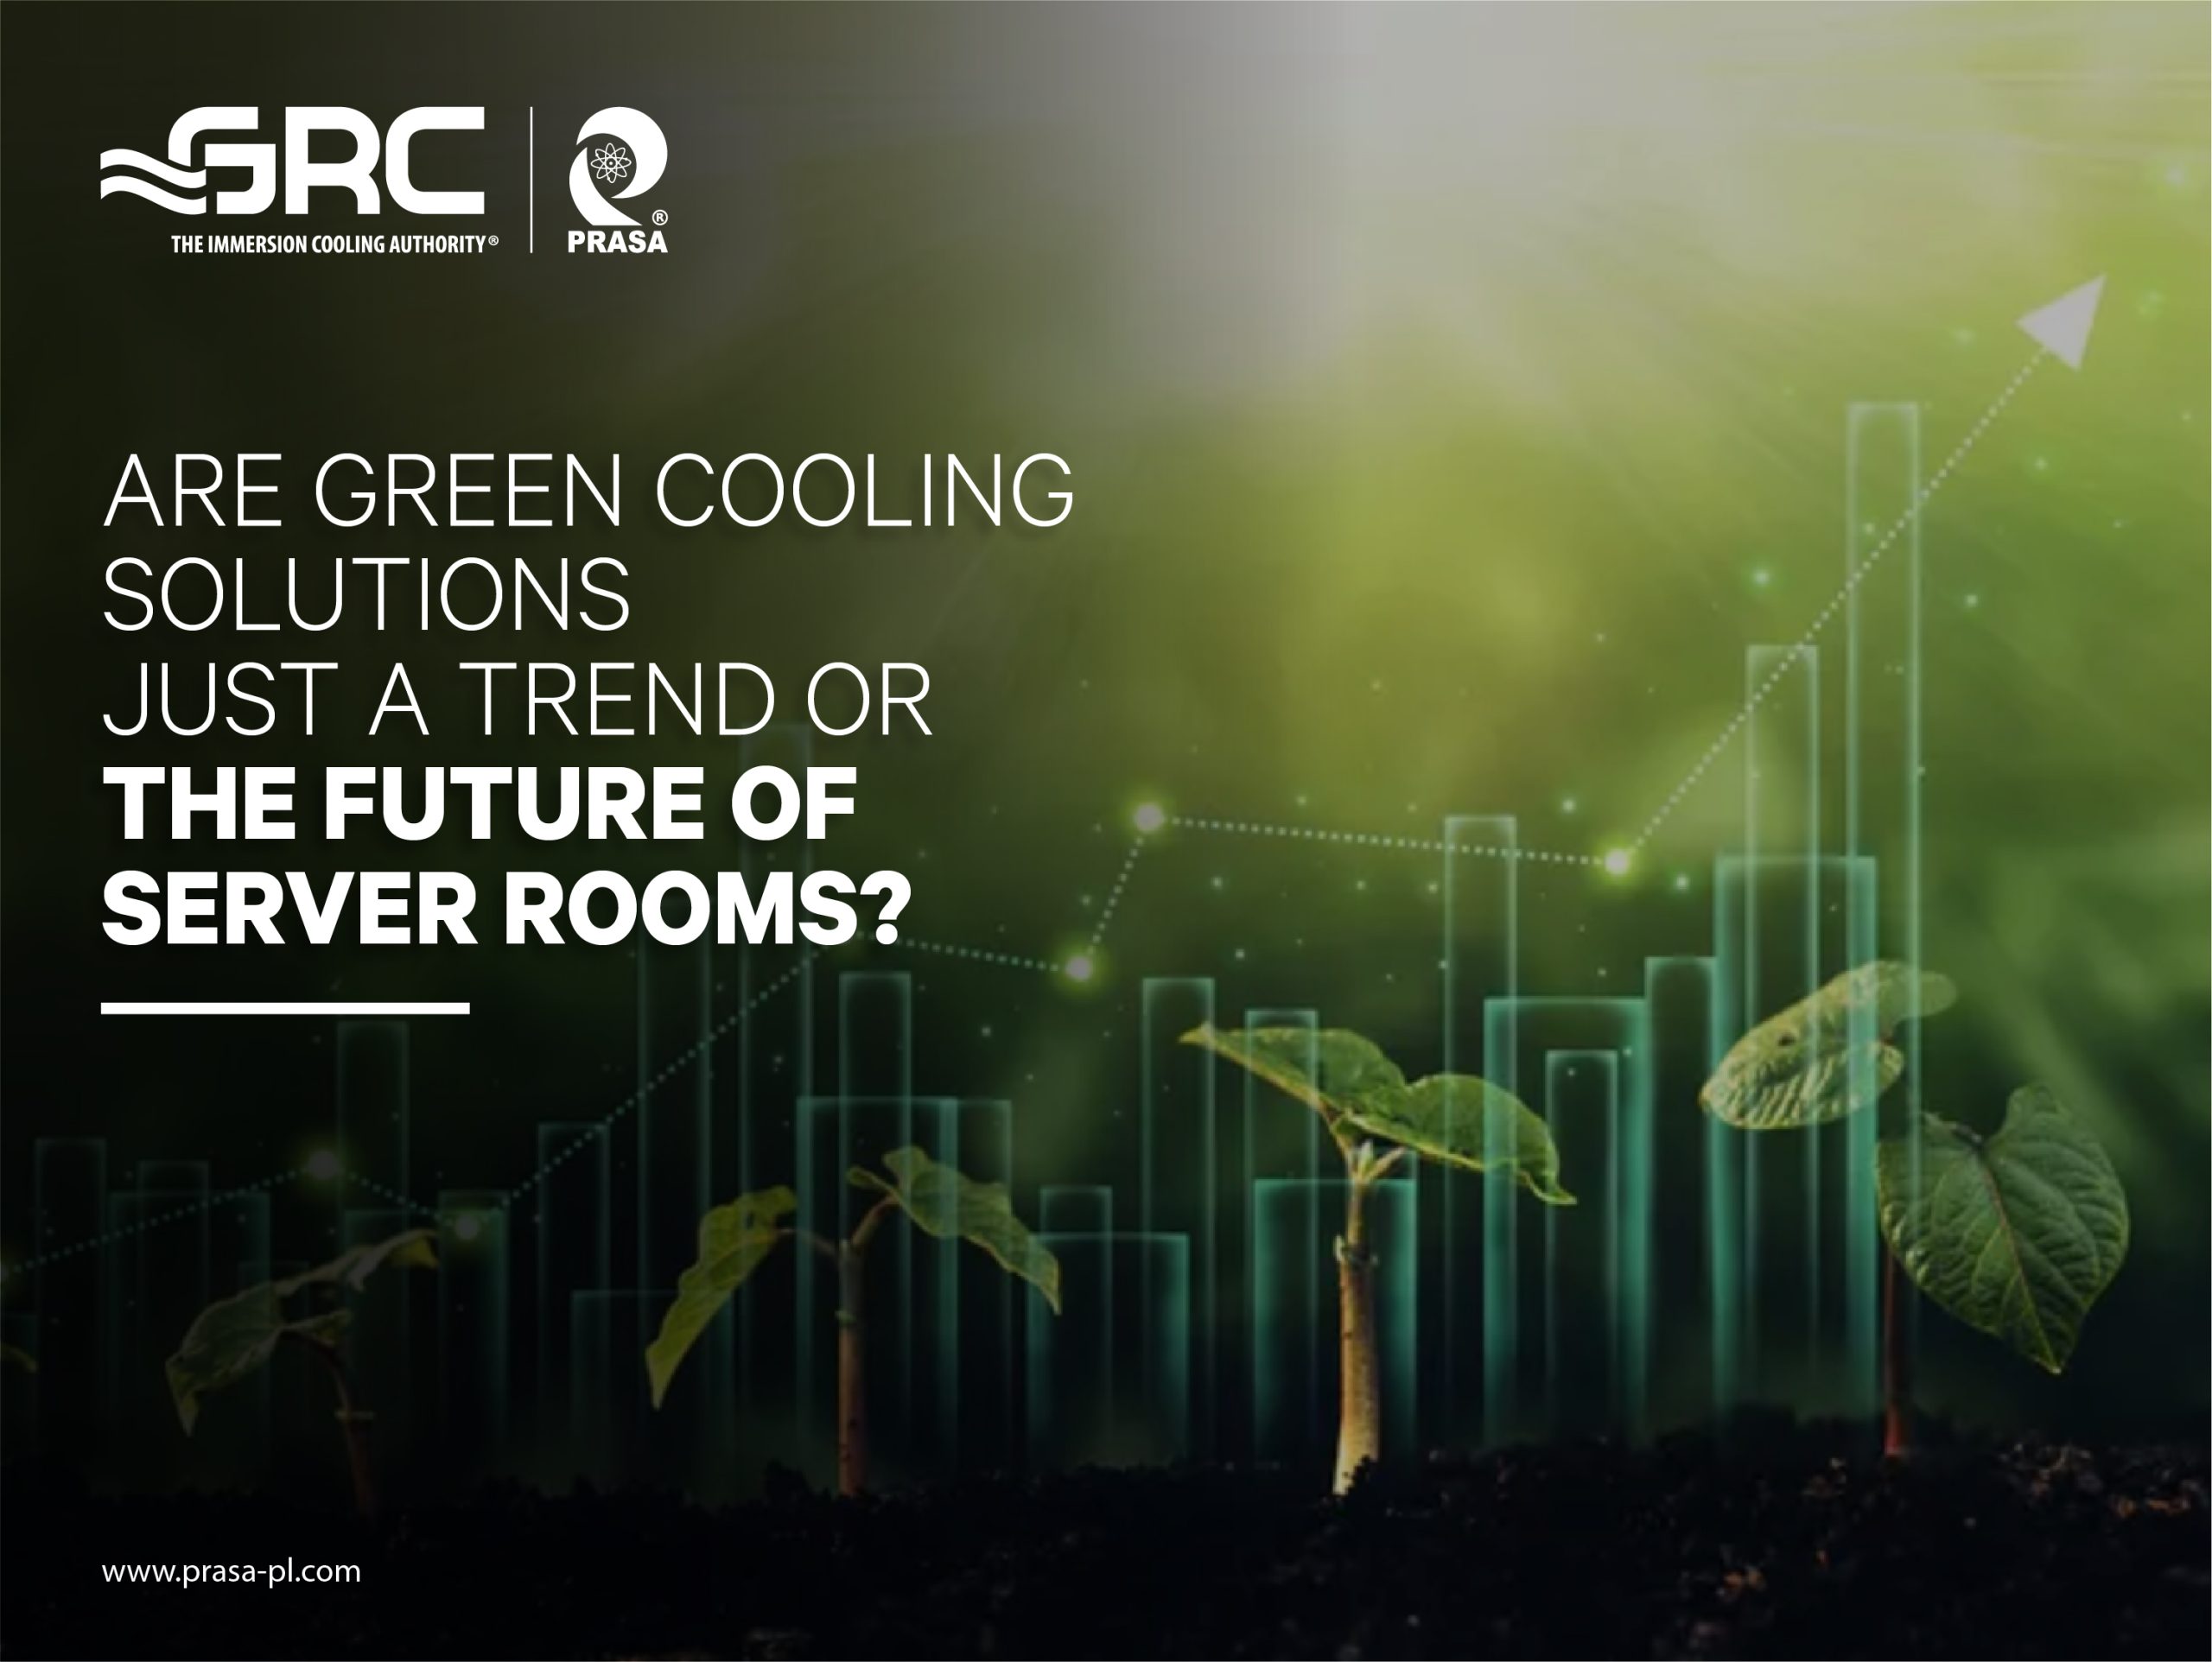 <strong>Are Green Cooling Solutions Just a Trend or the Future of Server Rooms?</strong>